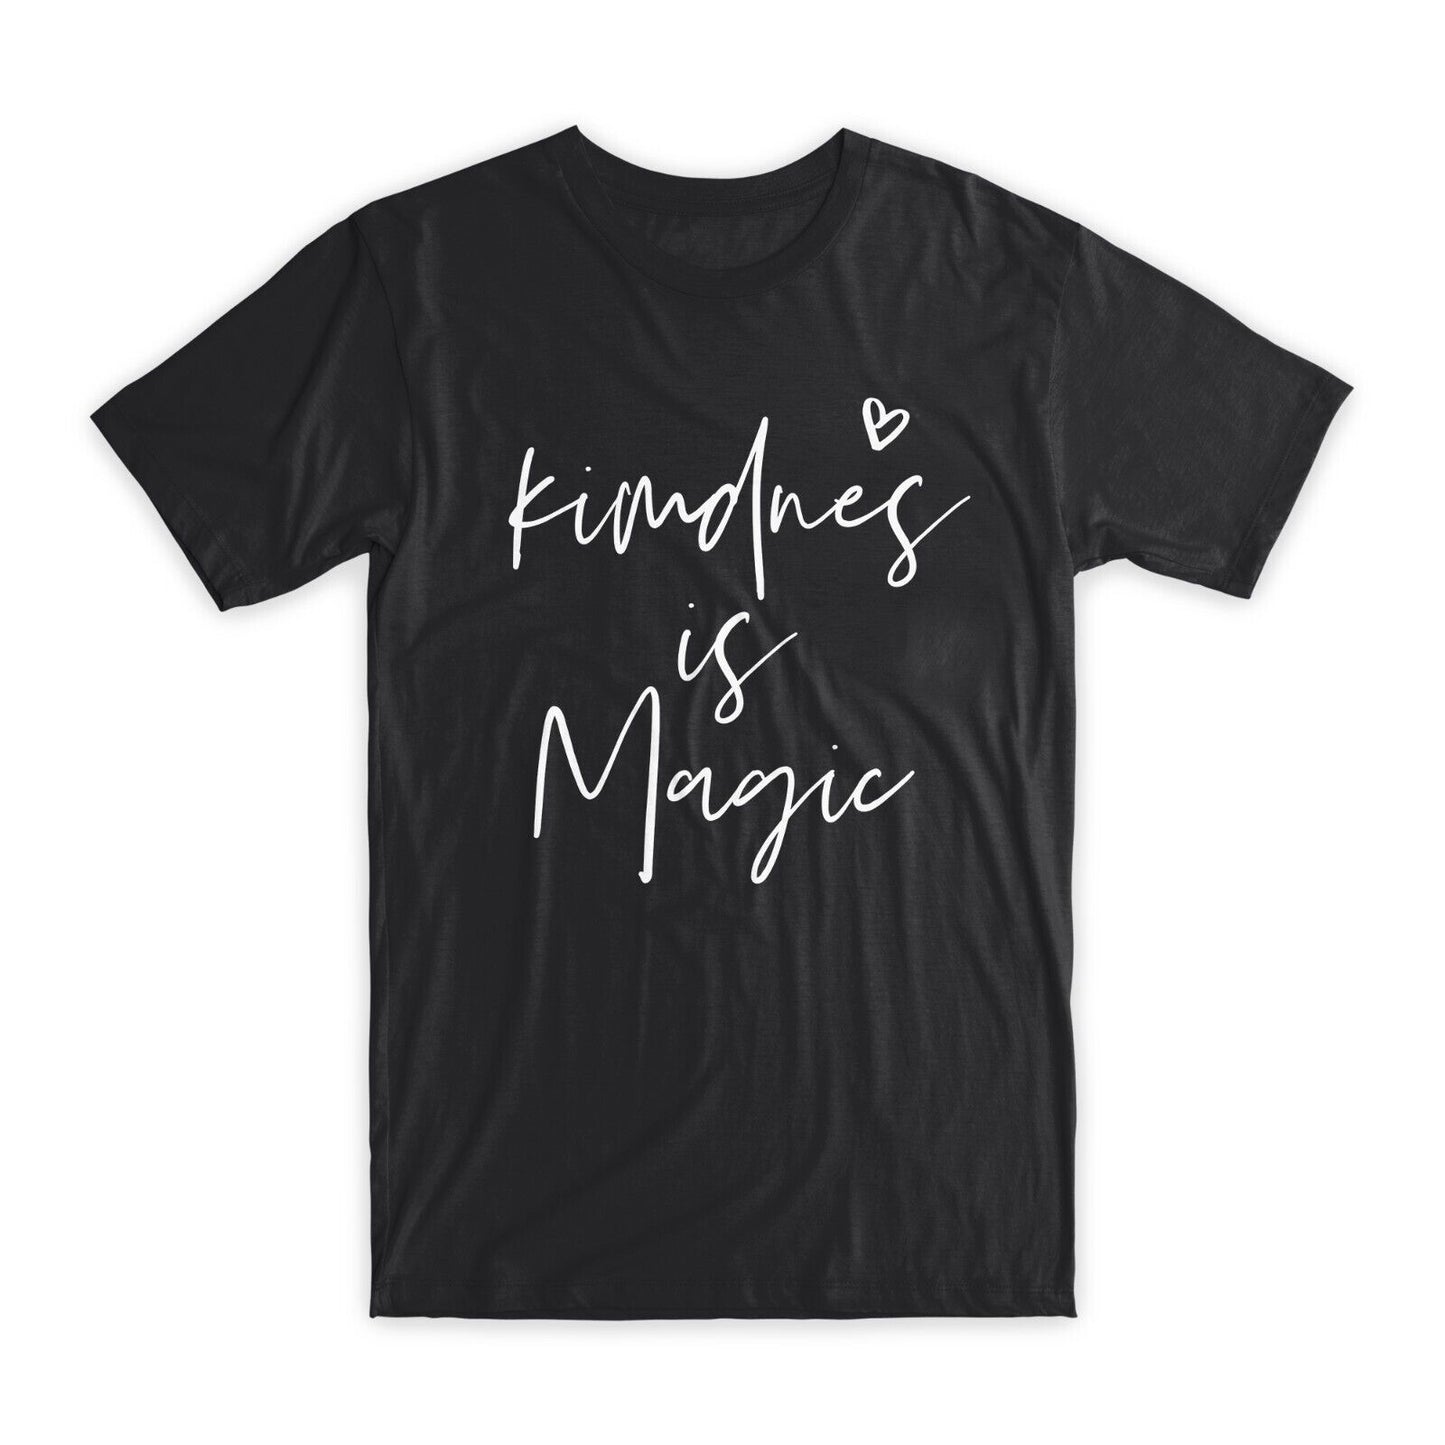 Kindness is Magic Print T-Shirt Premium Soft Cotton Crew Neck Funny Tee Gift NEW